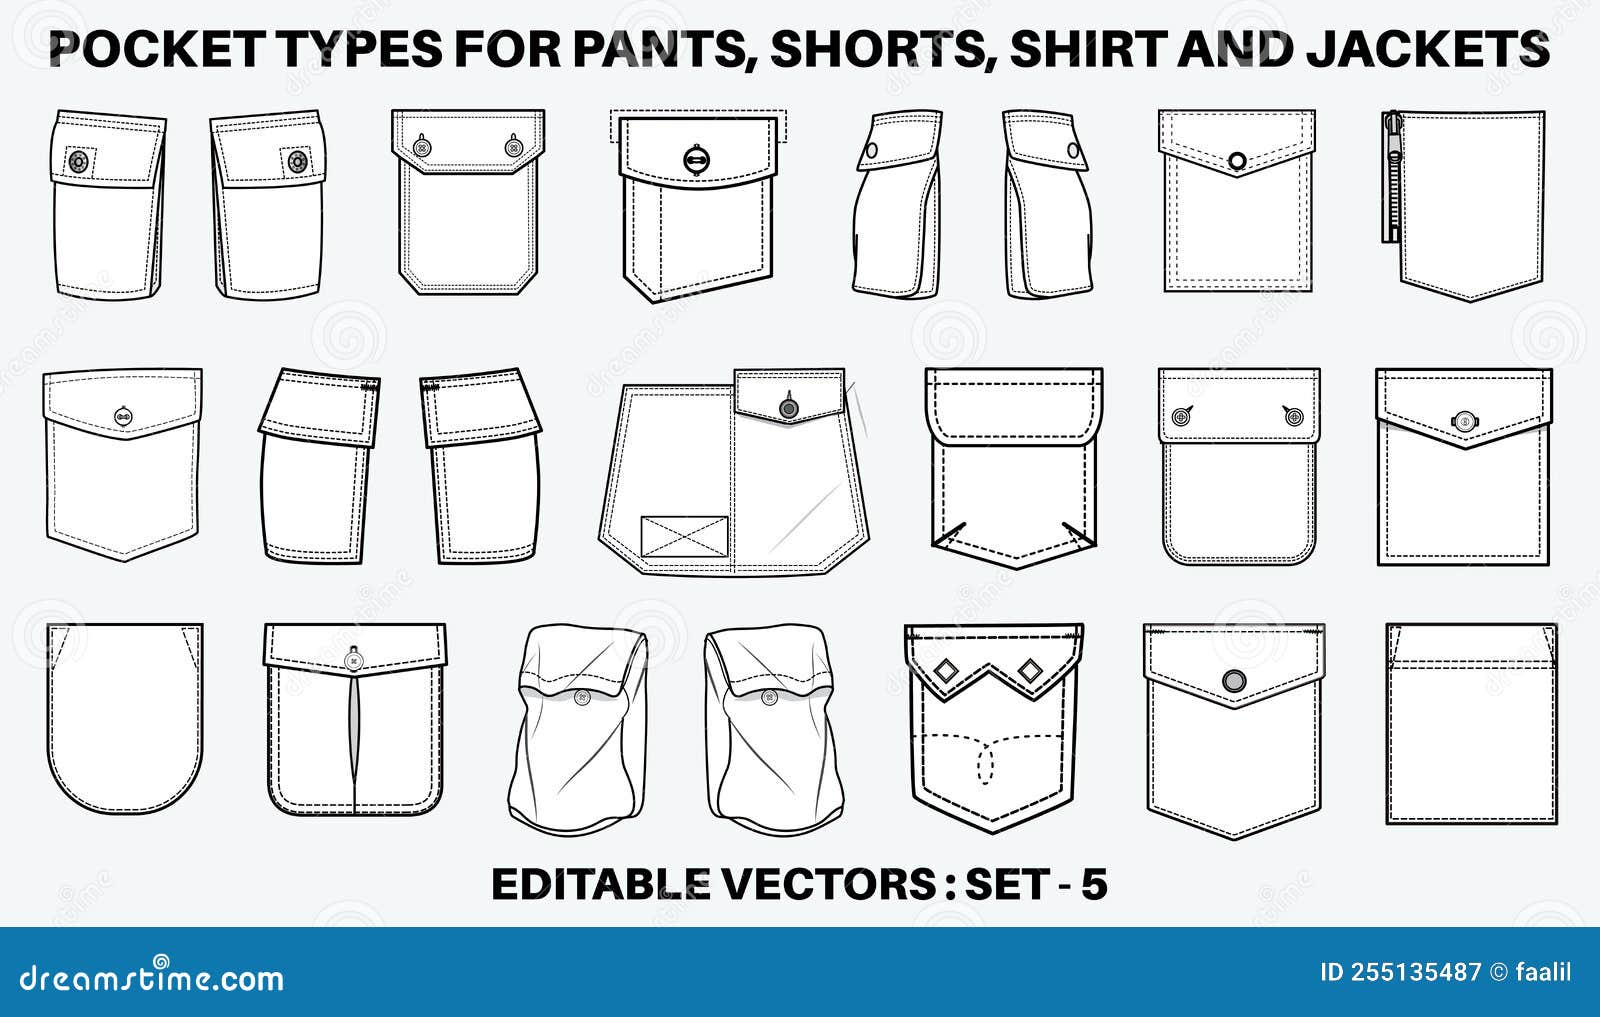 Pocket types icons doodle set. Pocket types icons set. doodle illustration  of vector icons isolated on white background for | CanStock